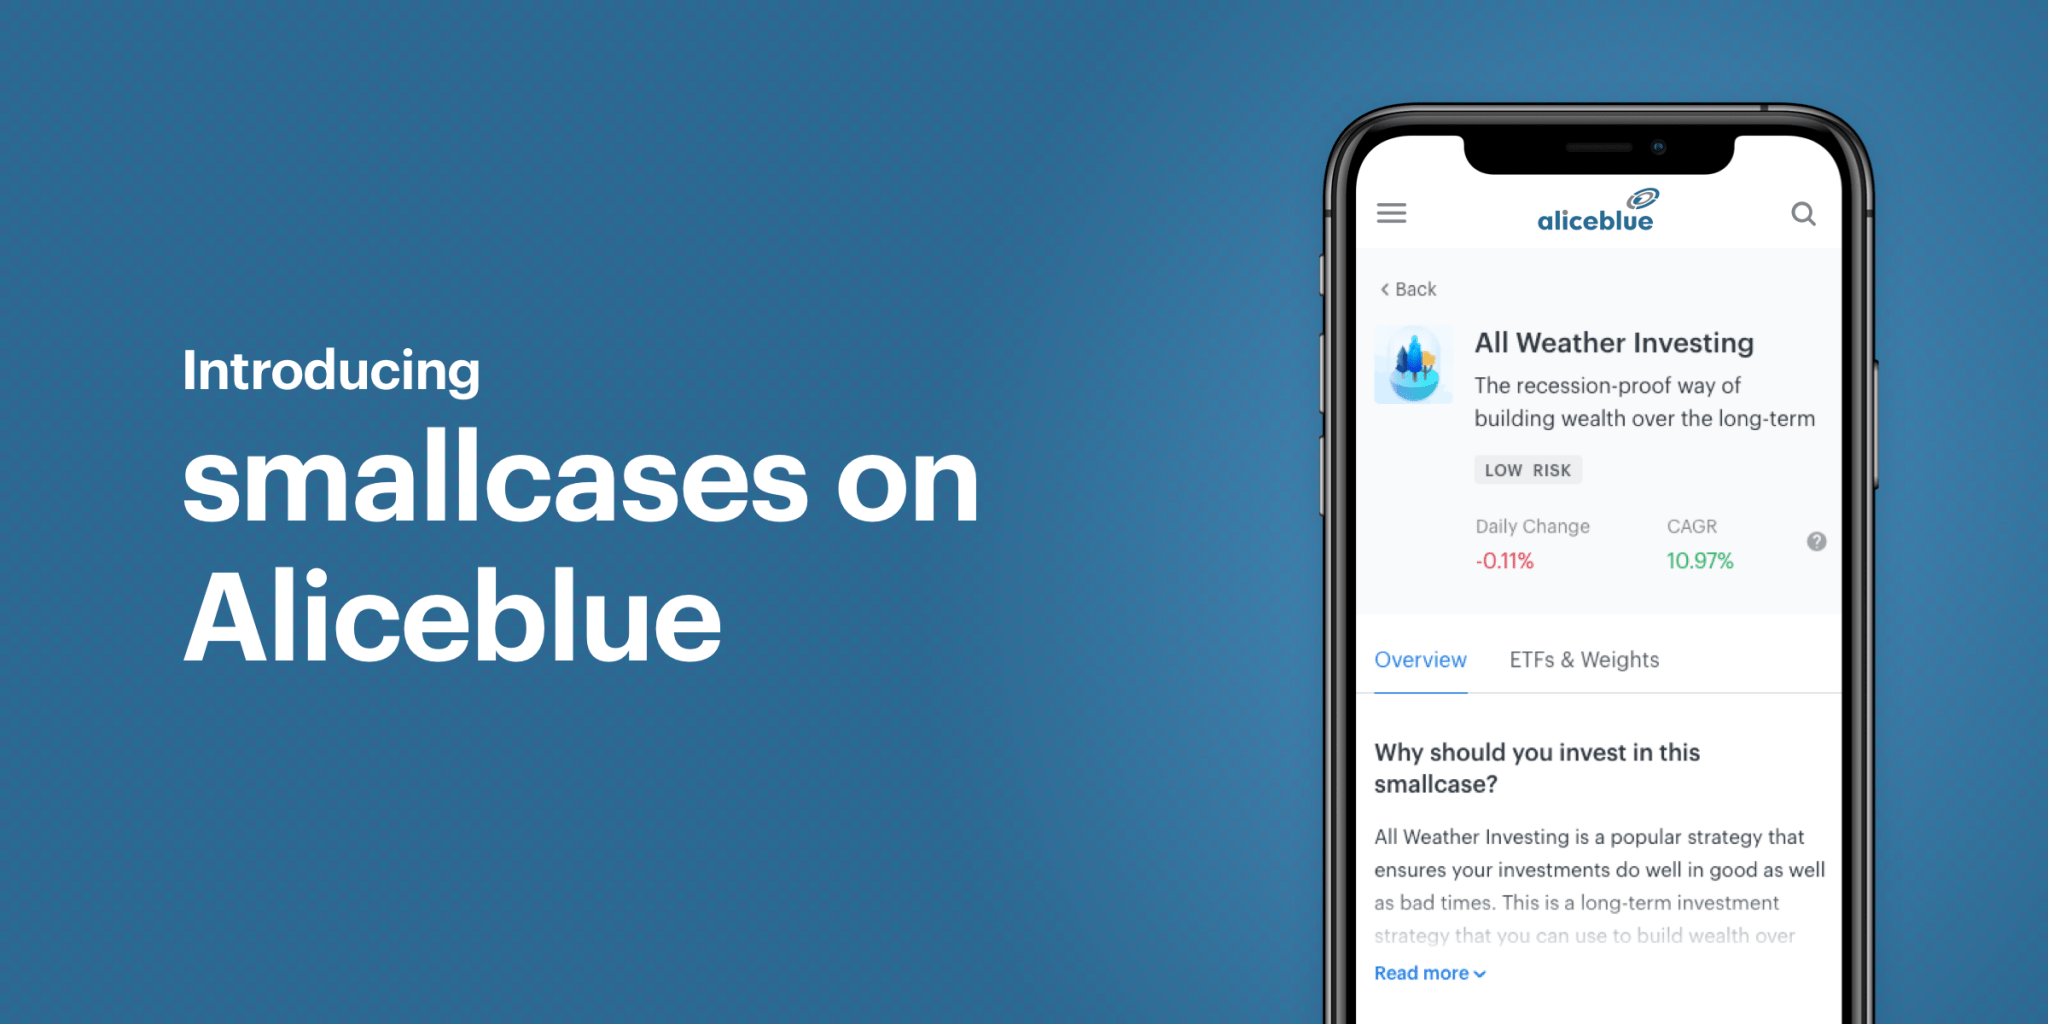 Introducing smallcases on Aliceblue